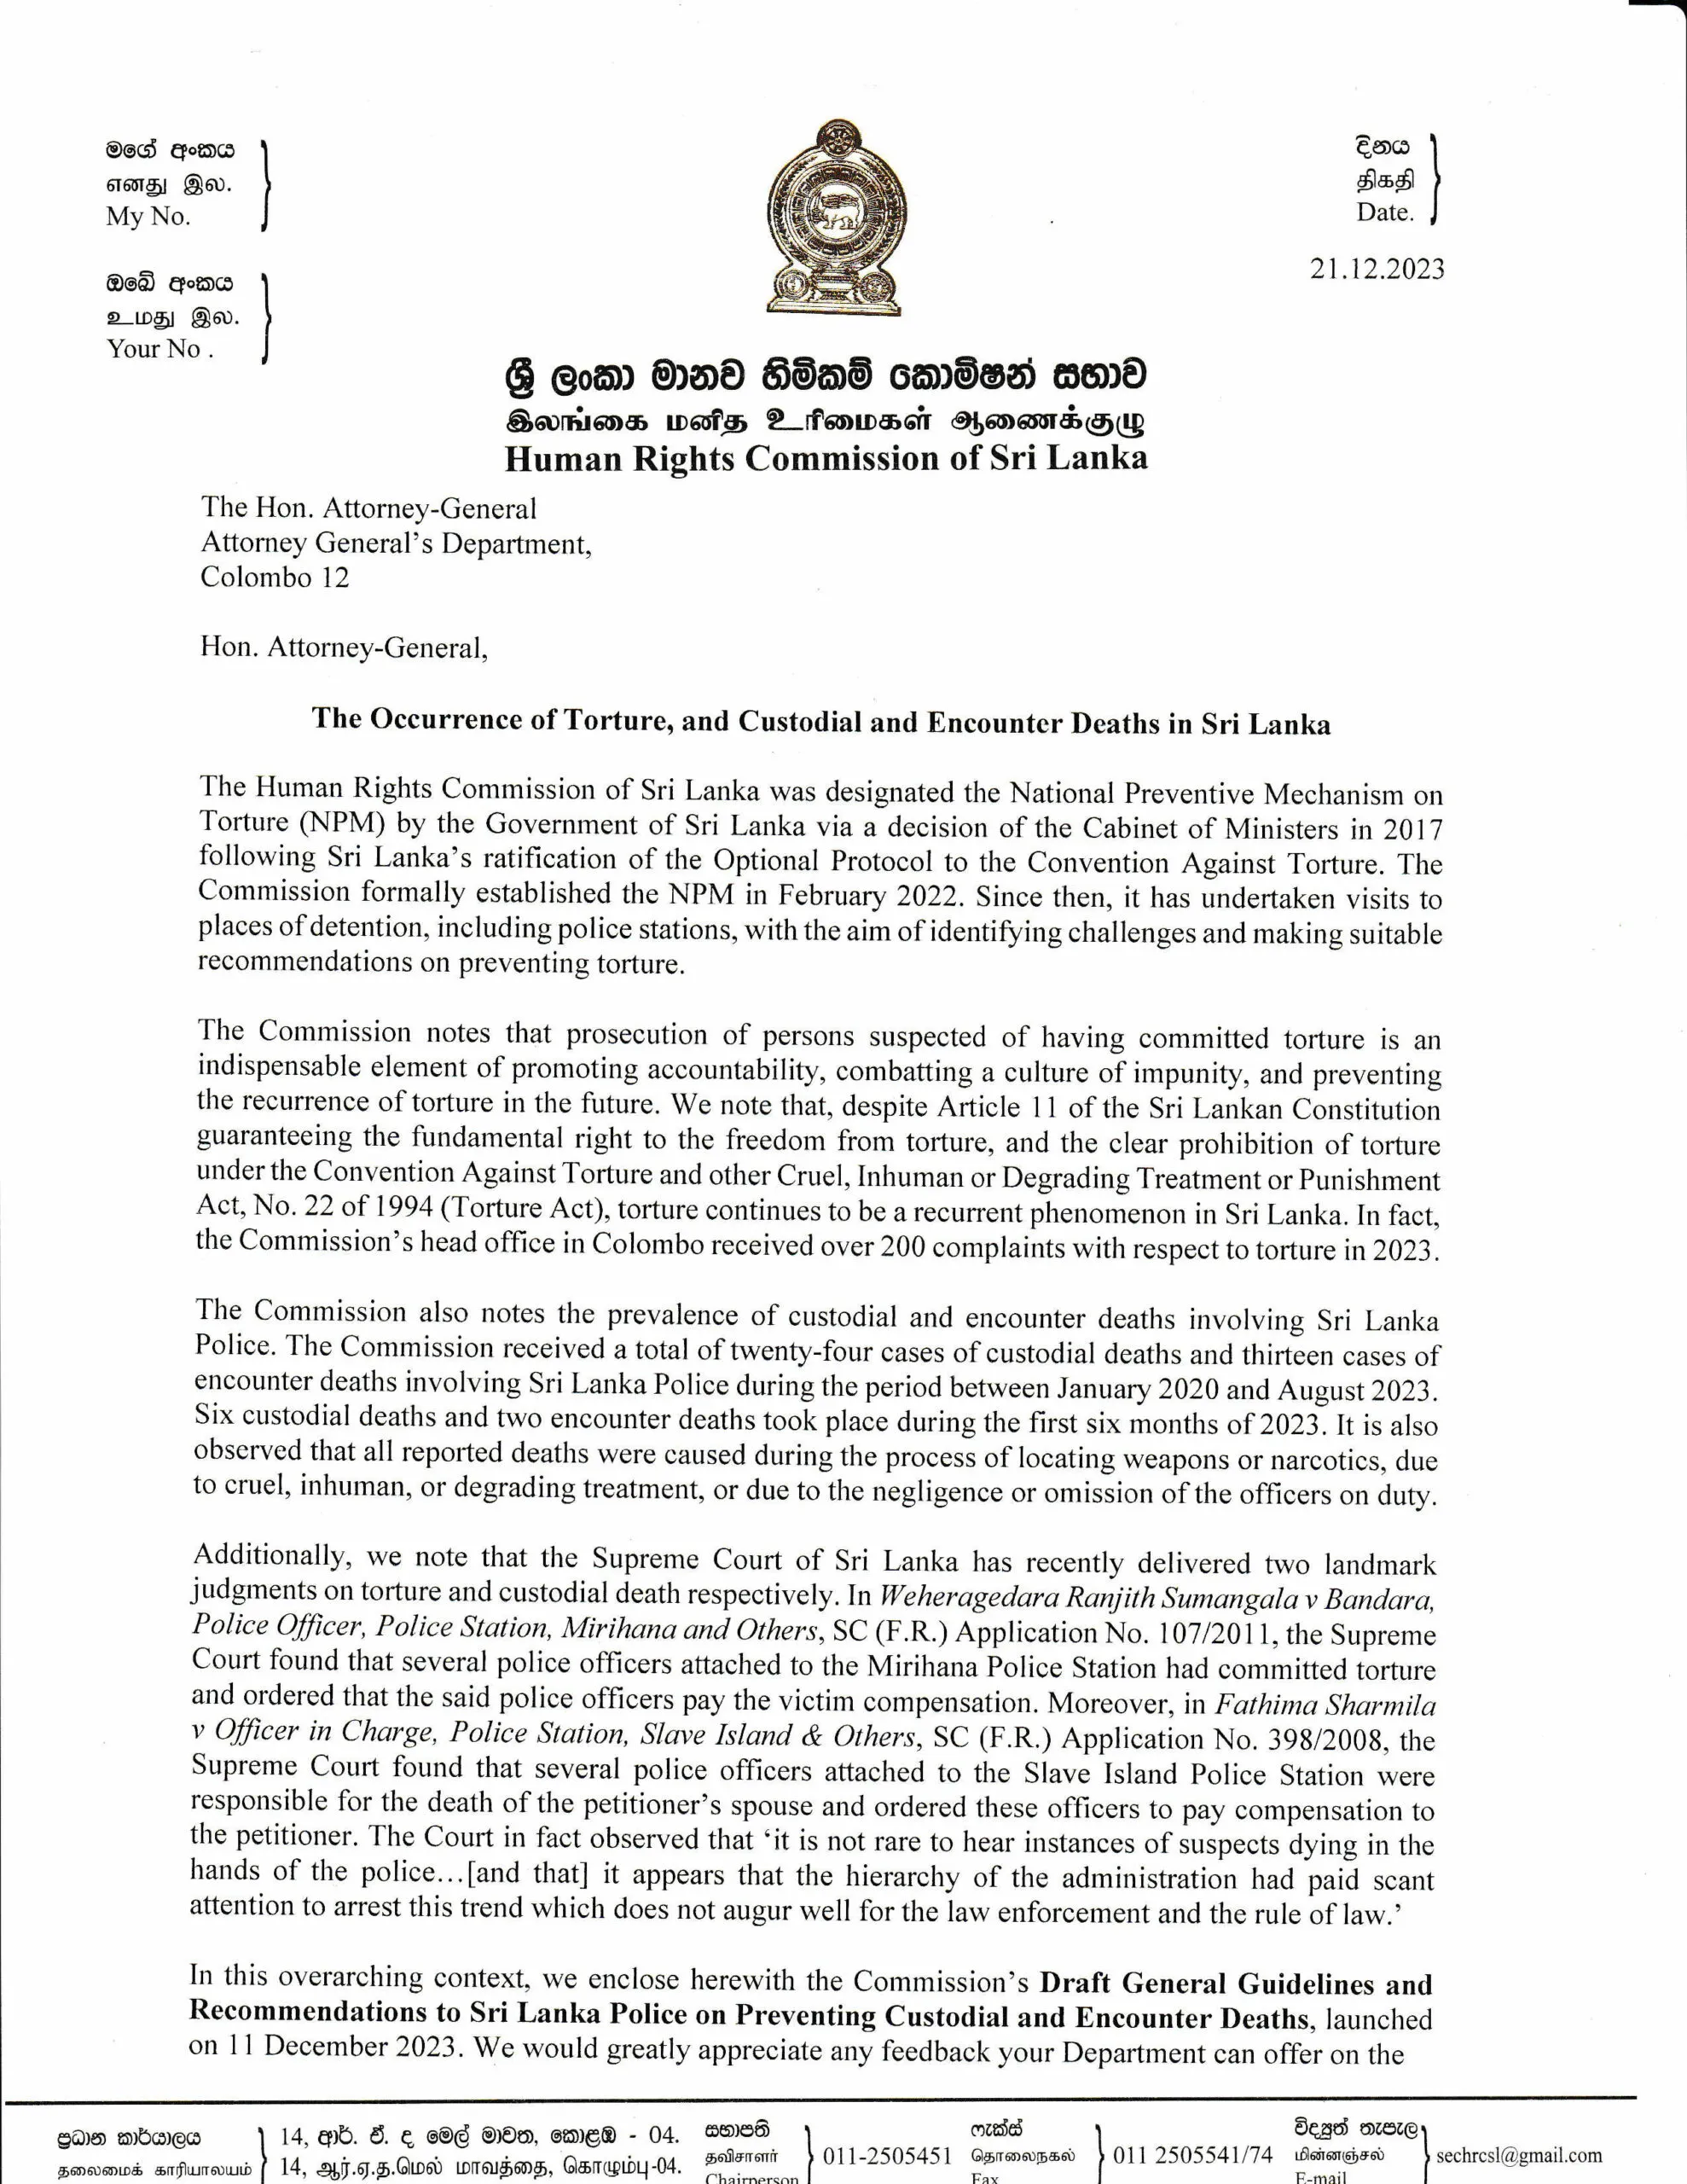 HRCSL Press Notice on 22 12 2023 and HRCSL letter to Attorney General on 21 December 2023 2 scaled